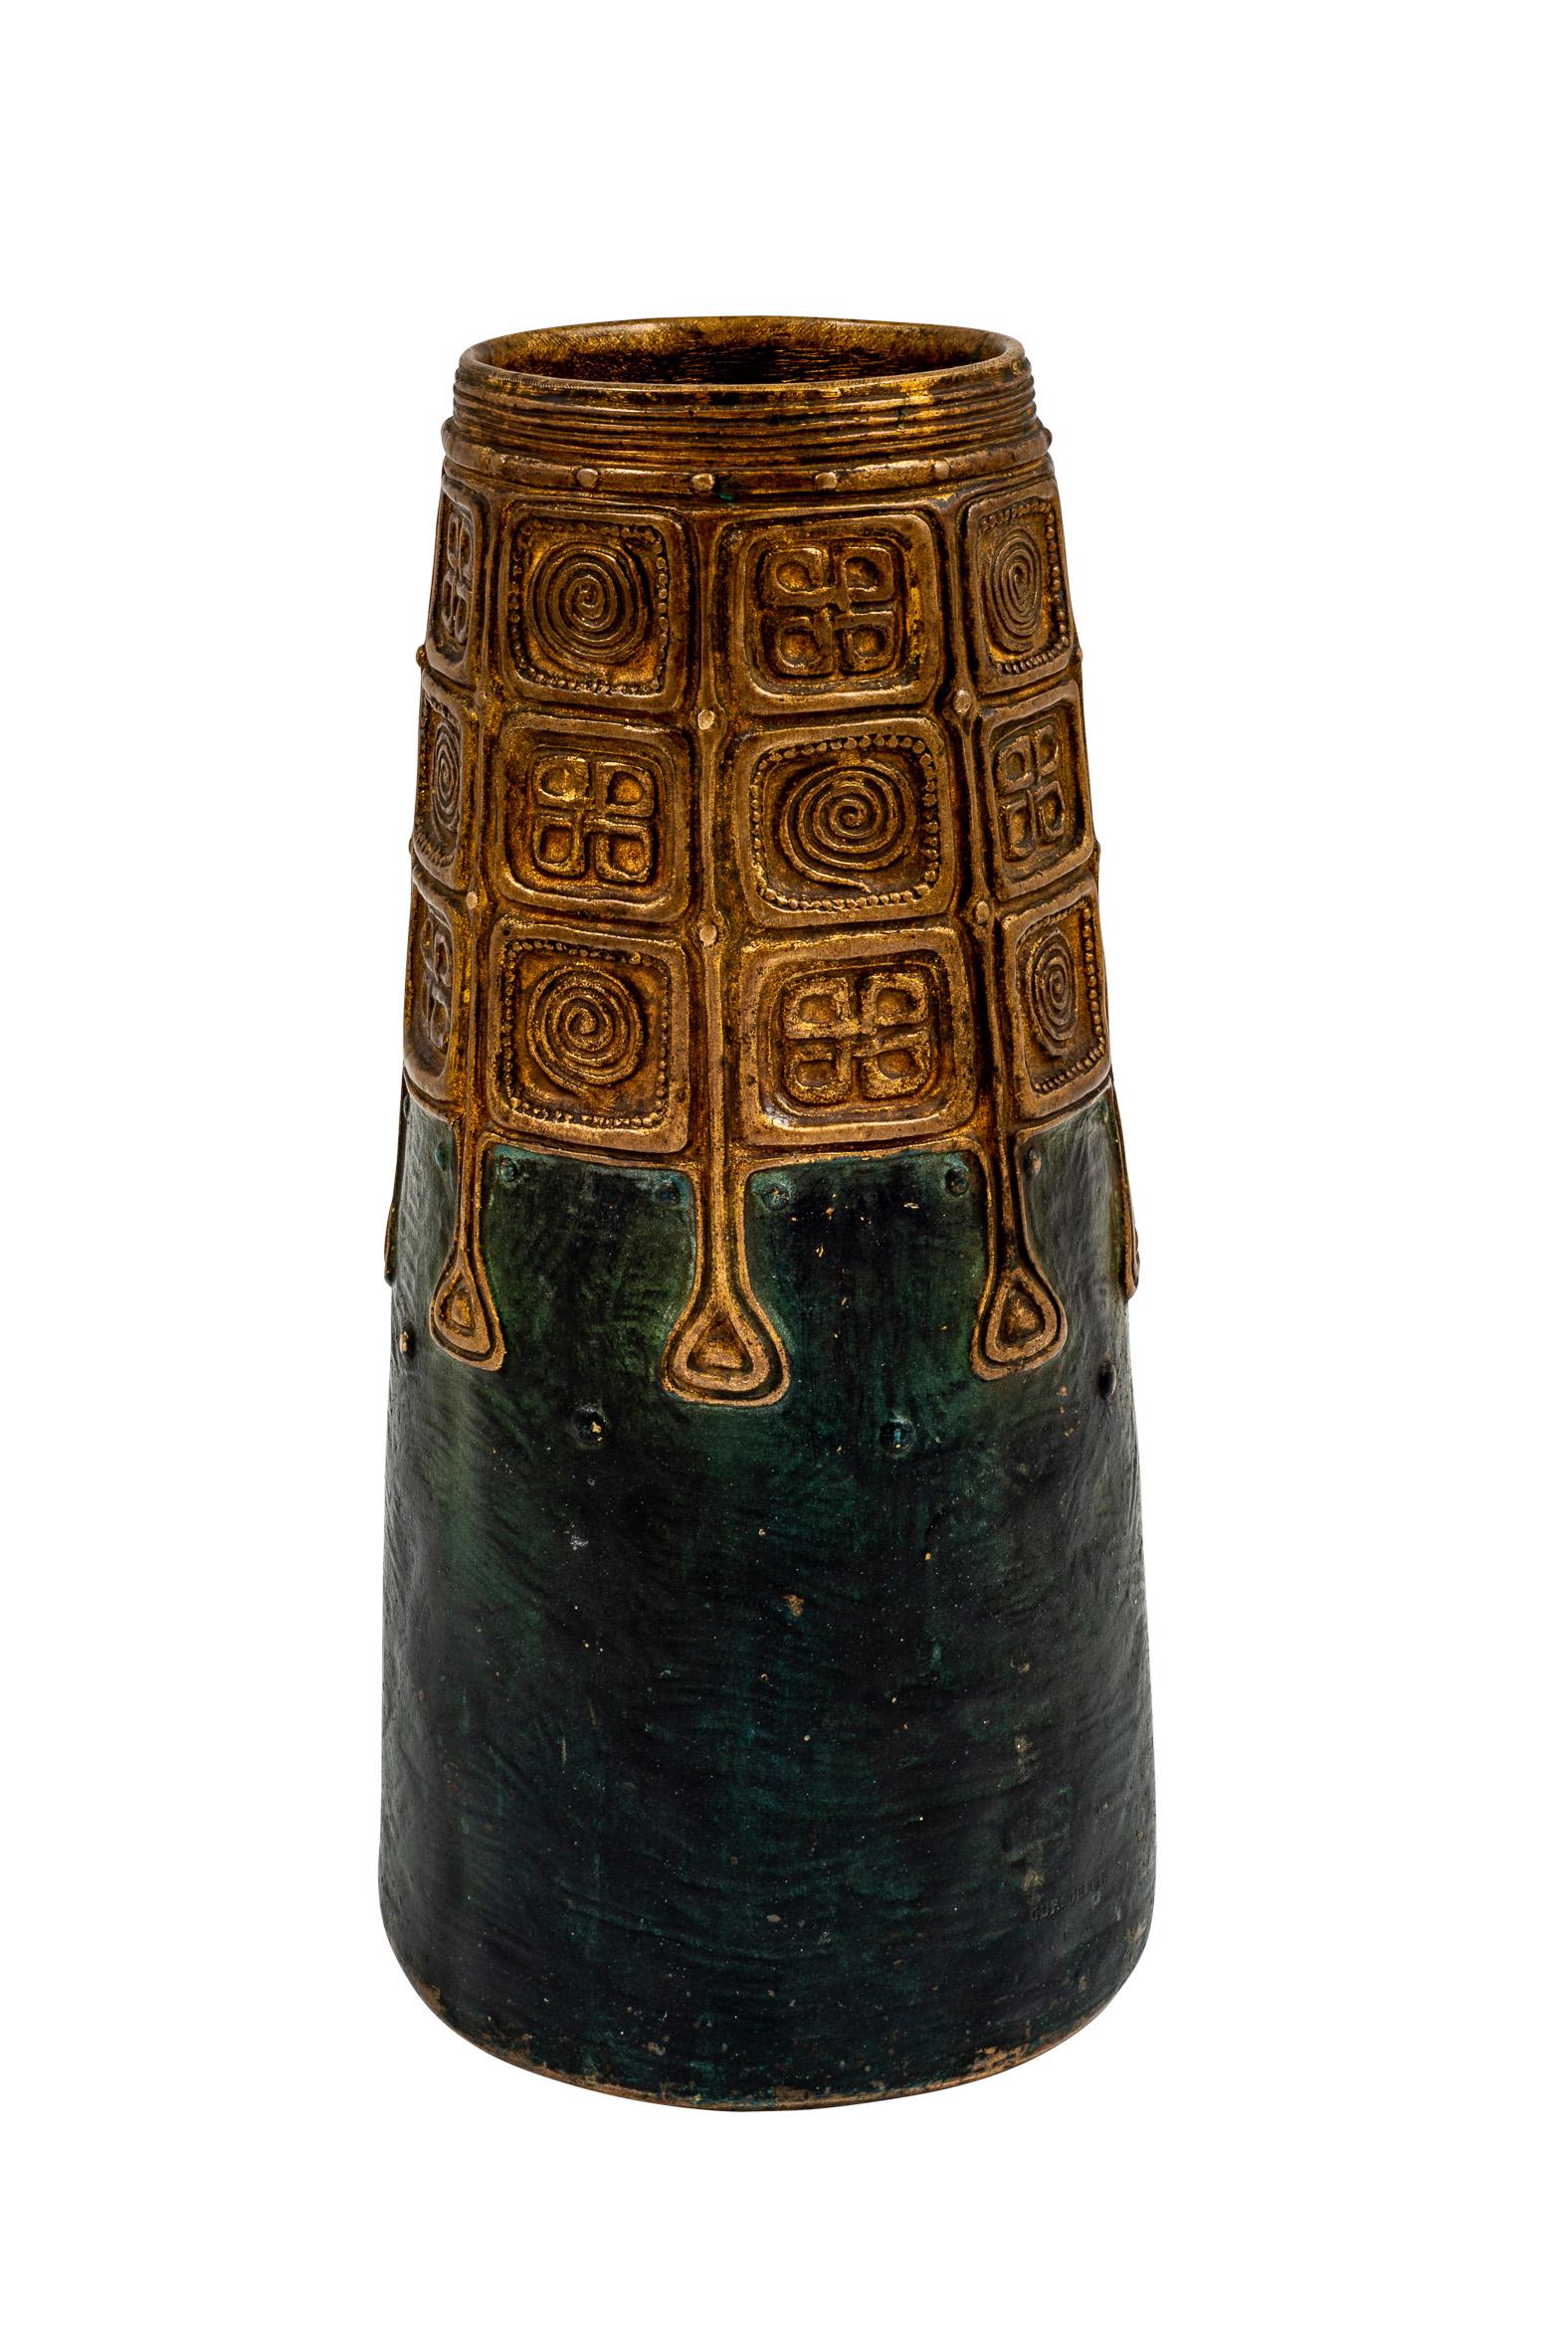 Austrian Jugendstil Patinated bronze vase designed by Gustav Gurschner manufactured by K.K. Kunst-Erzgiesserei circa 1906

In the period around 1900, Austria experiences a change in arts and crafts. Artistic impulses from Great Britain become